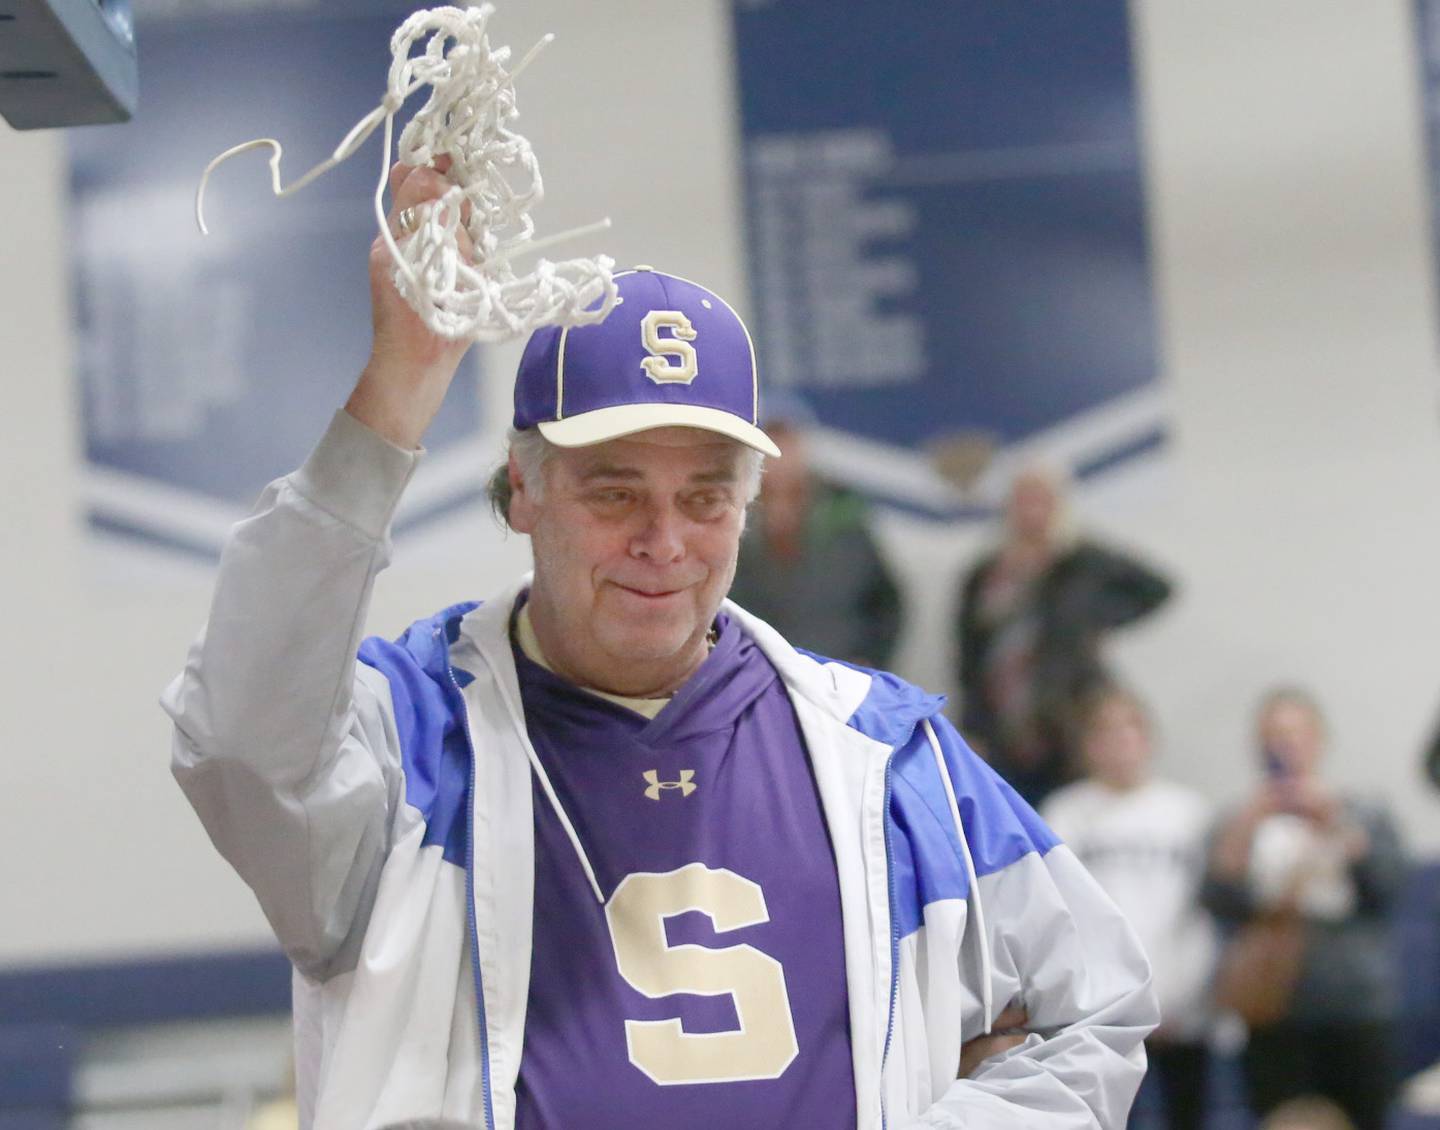 Serena High School athletic director Dean DeRango cuts down the net after the Huskers won the Little Ten boys basketball tournament championship this past February at Somonauk High School.